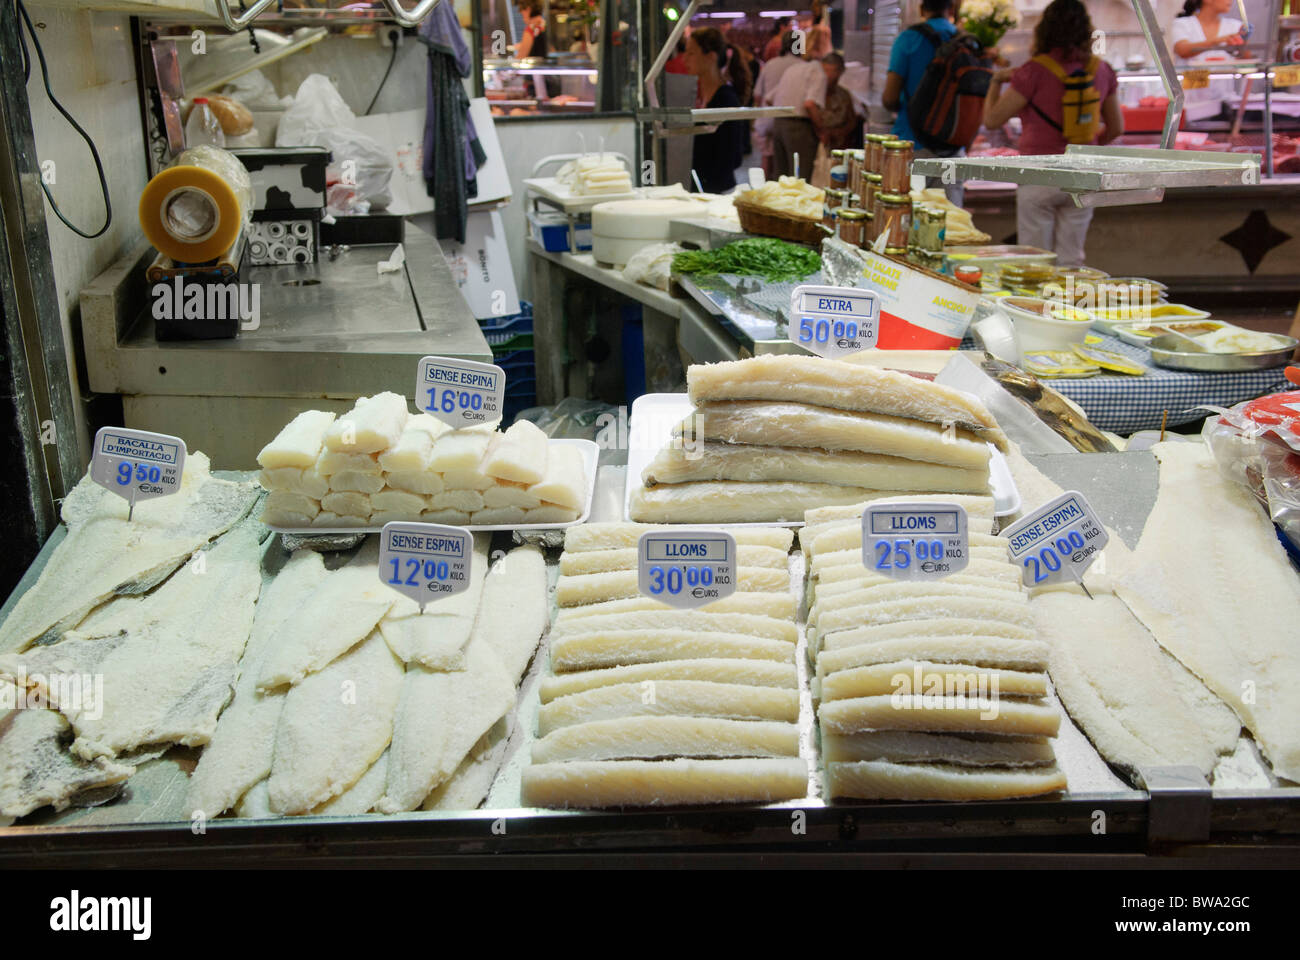 bacalao, dried salted cod fish on sale at stall in La Boqueria market hall in Barcelona, Spain Stock Photo